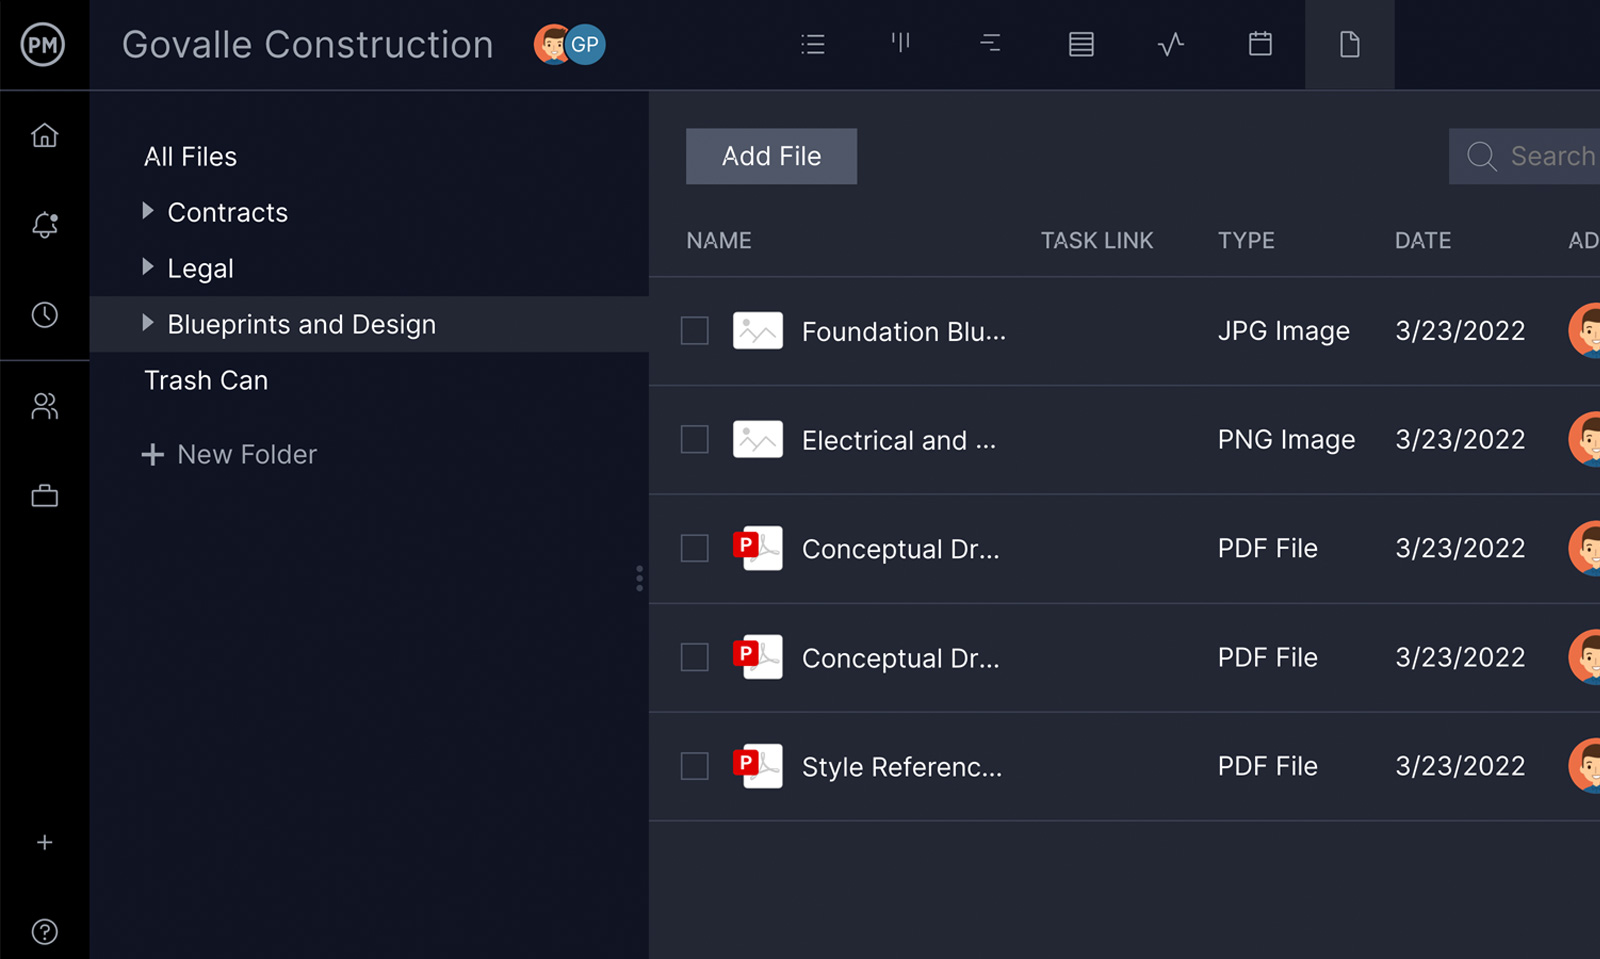 ProjectManager's facilitates file storage and file sharing for waterfall teams